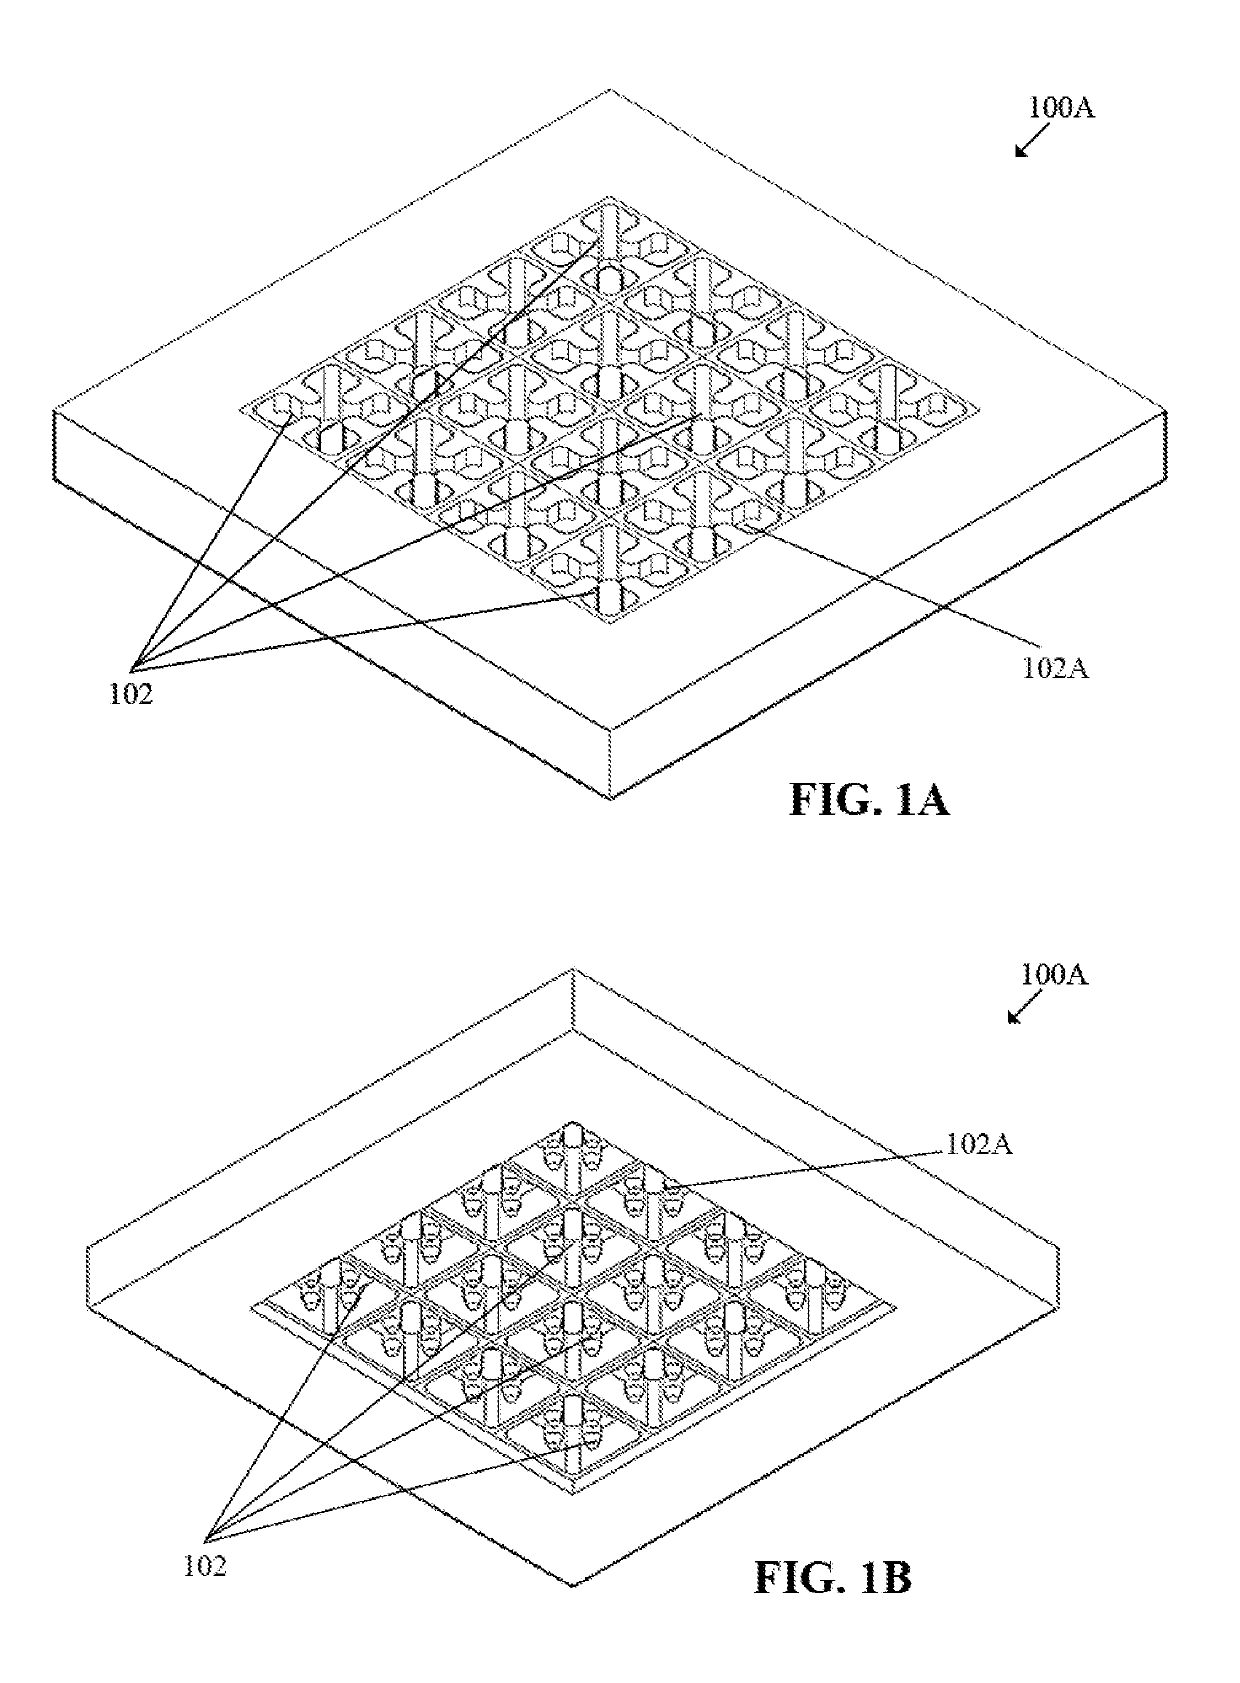 Waveguide Antenna Element-Based Beam Forming Phased Array Antenna System for Millimeter Wave Communication